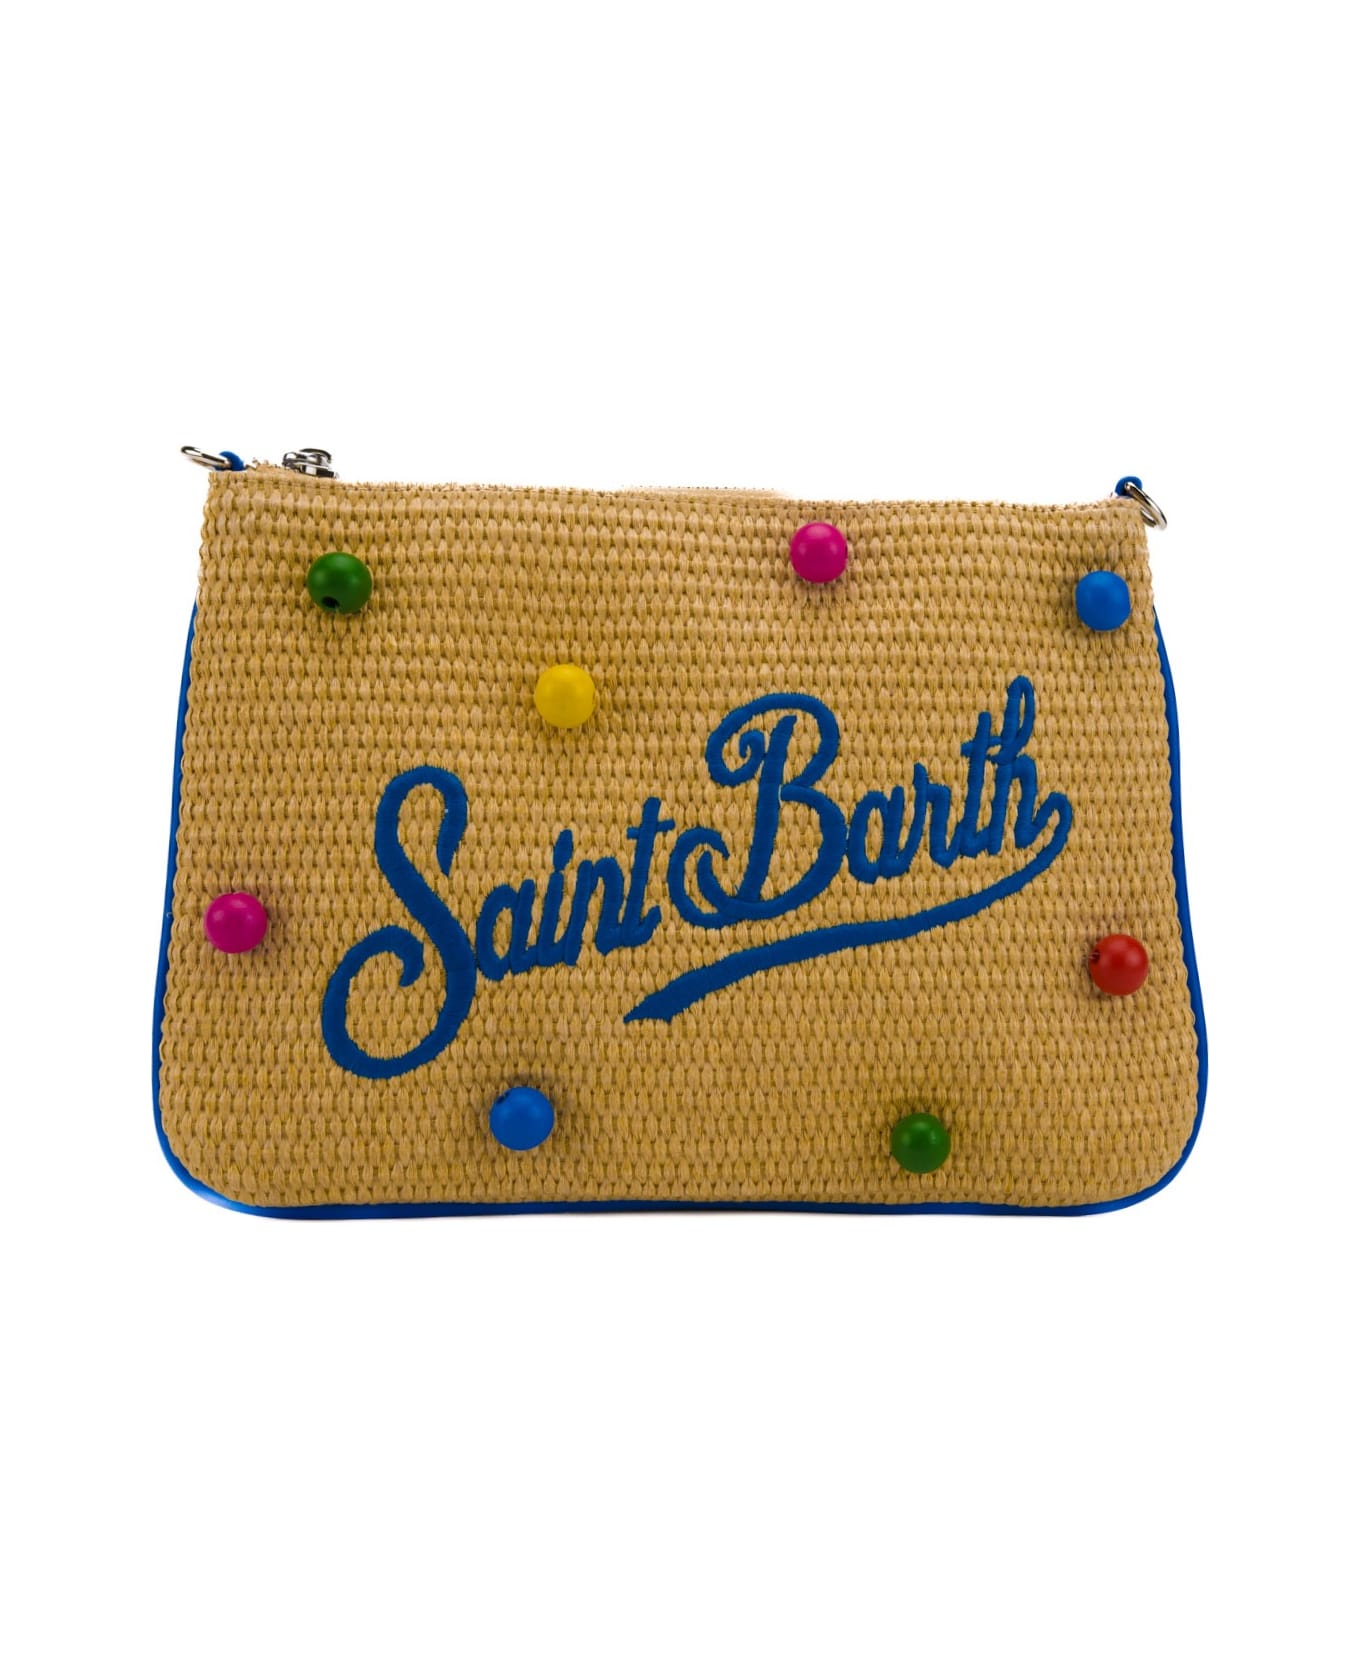 MC2 Saint Barth Parisienne Bag In Raffia With Wooden Beads - Naturale/multicolor